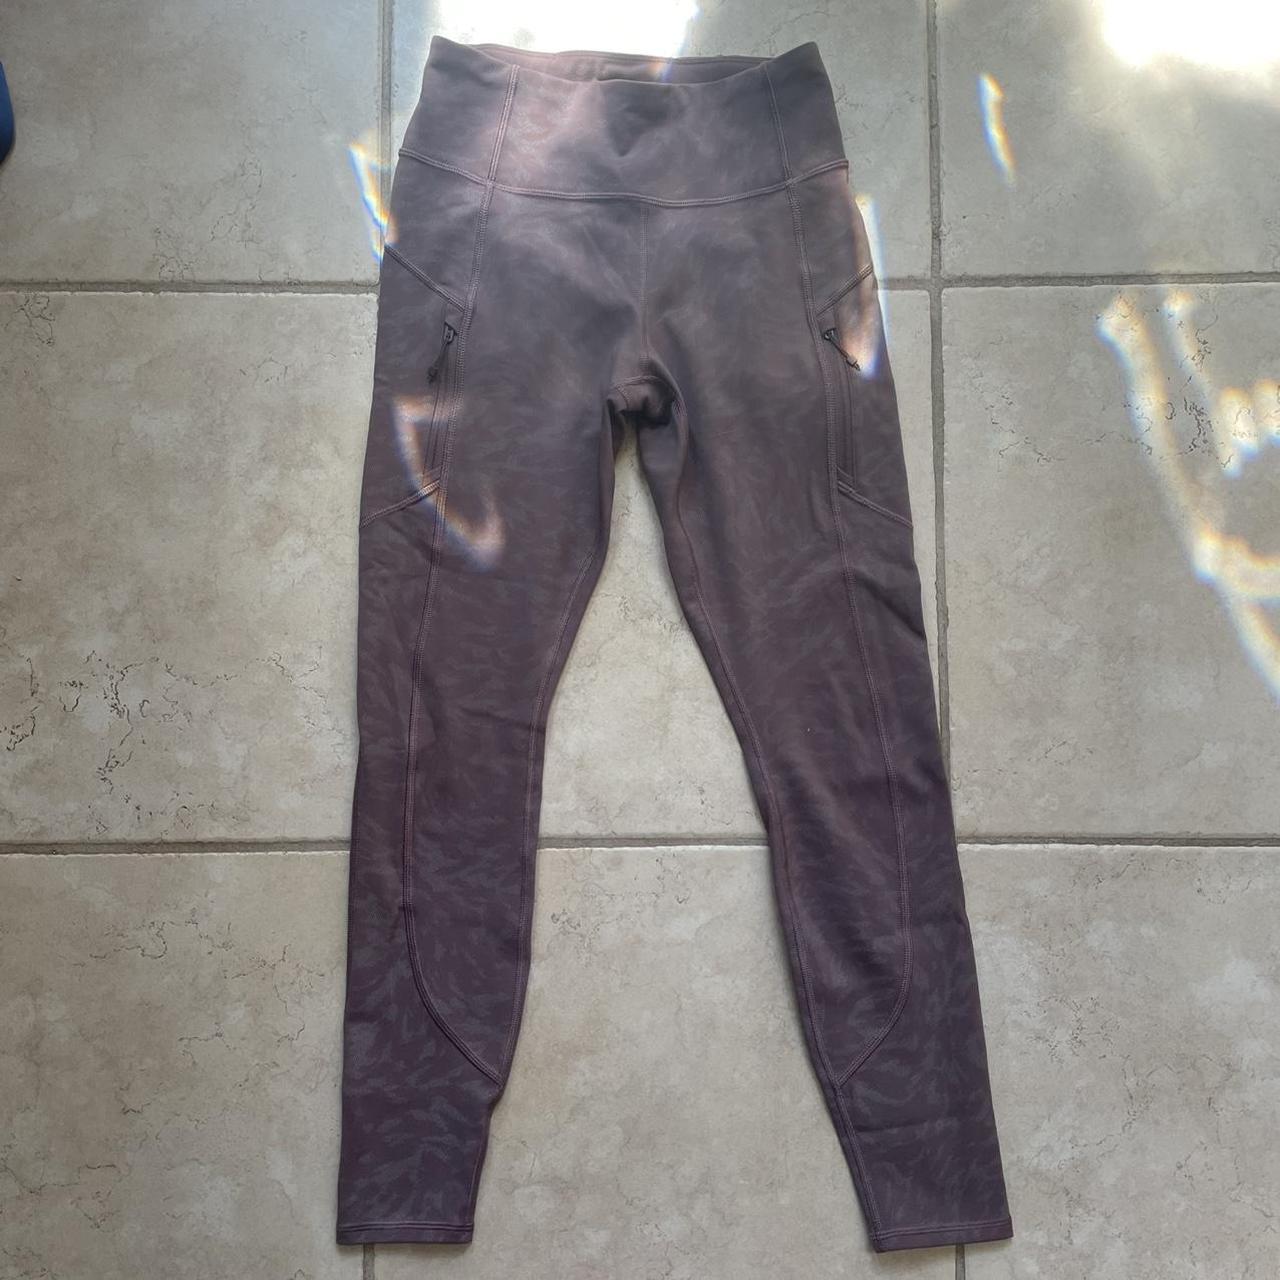 athleta leggings with zipper pockets! only been worn